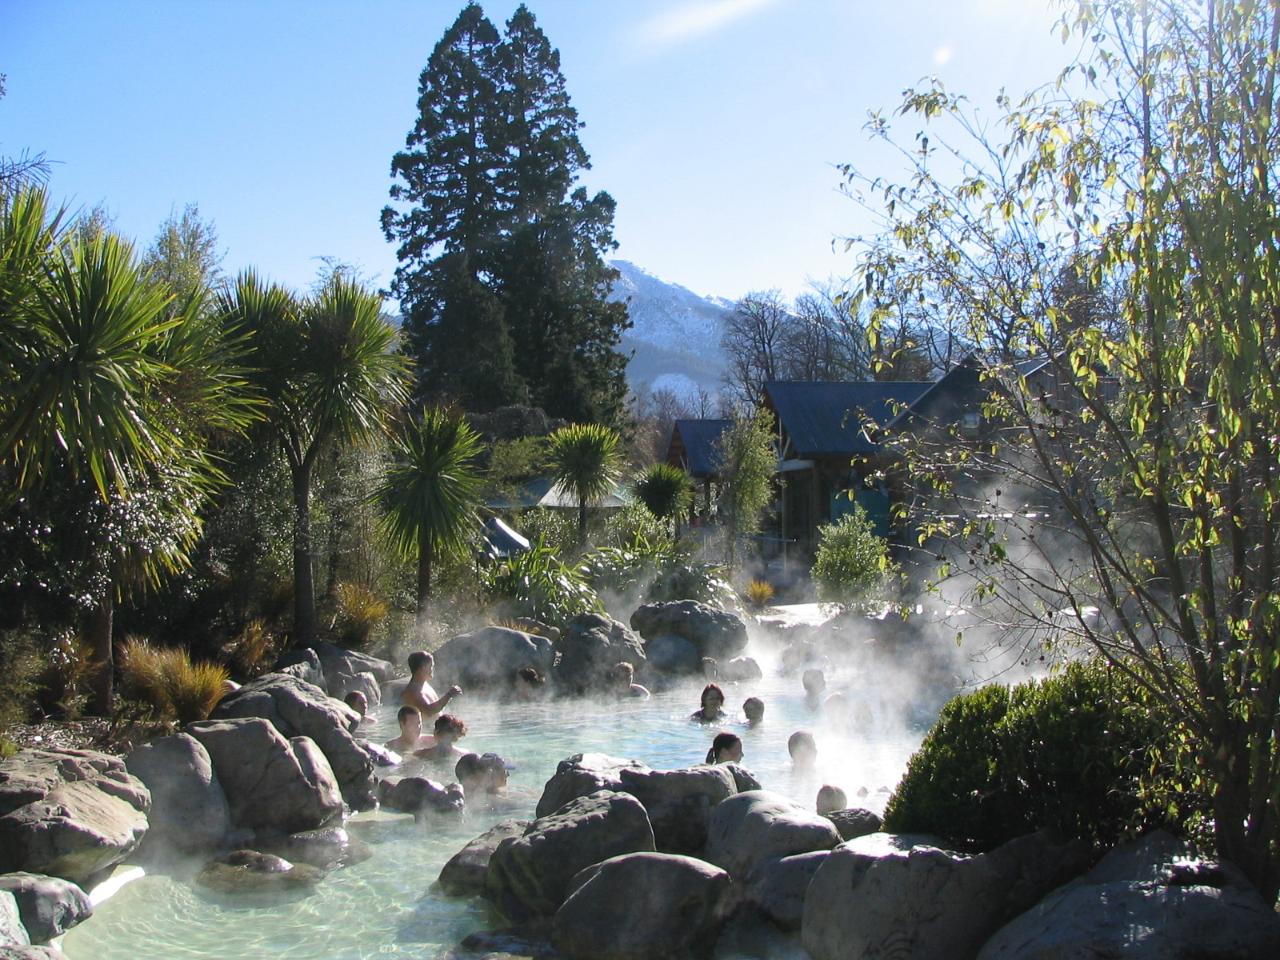 Hanmer Springs Day Tour From Christchurch With Hot Pools (Small Group, Carbon Neutral)